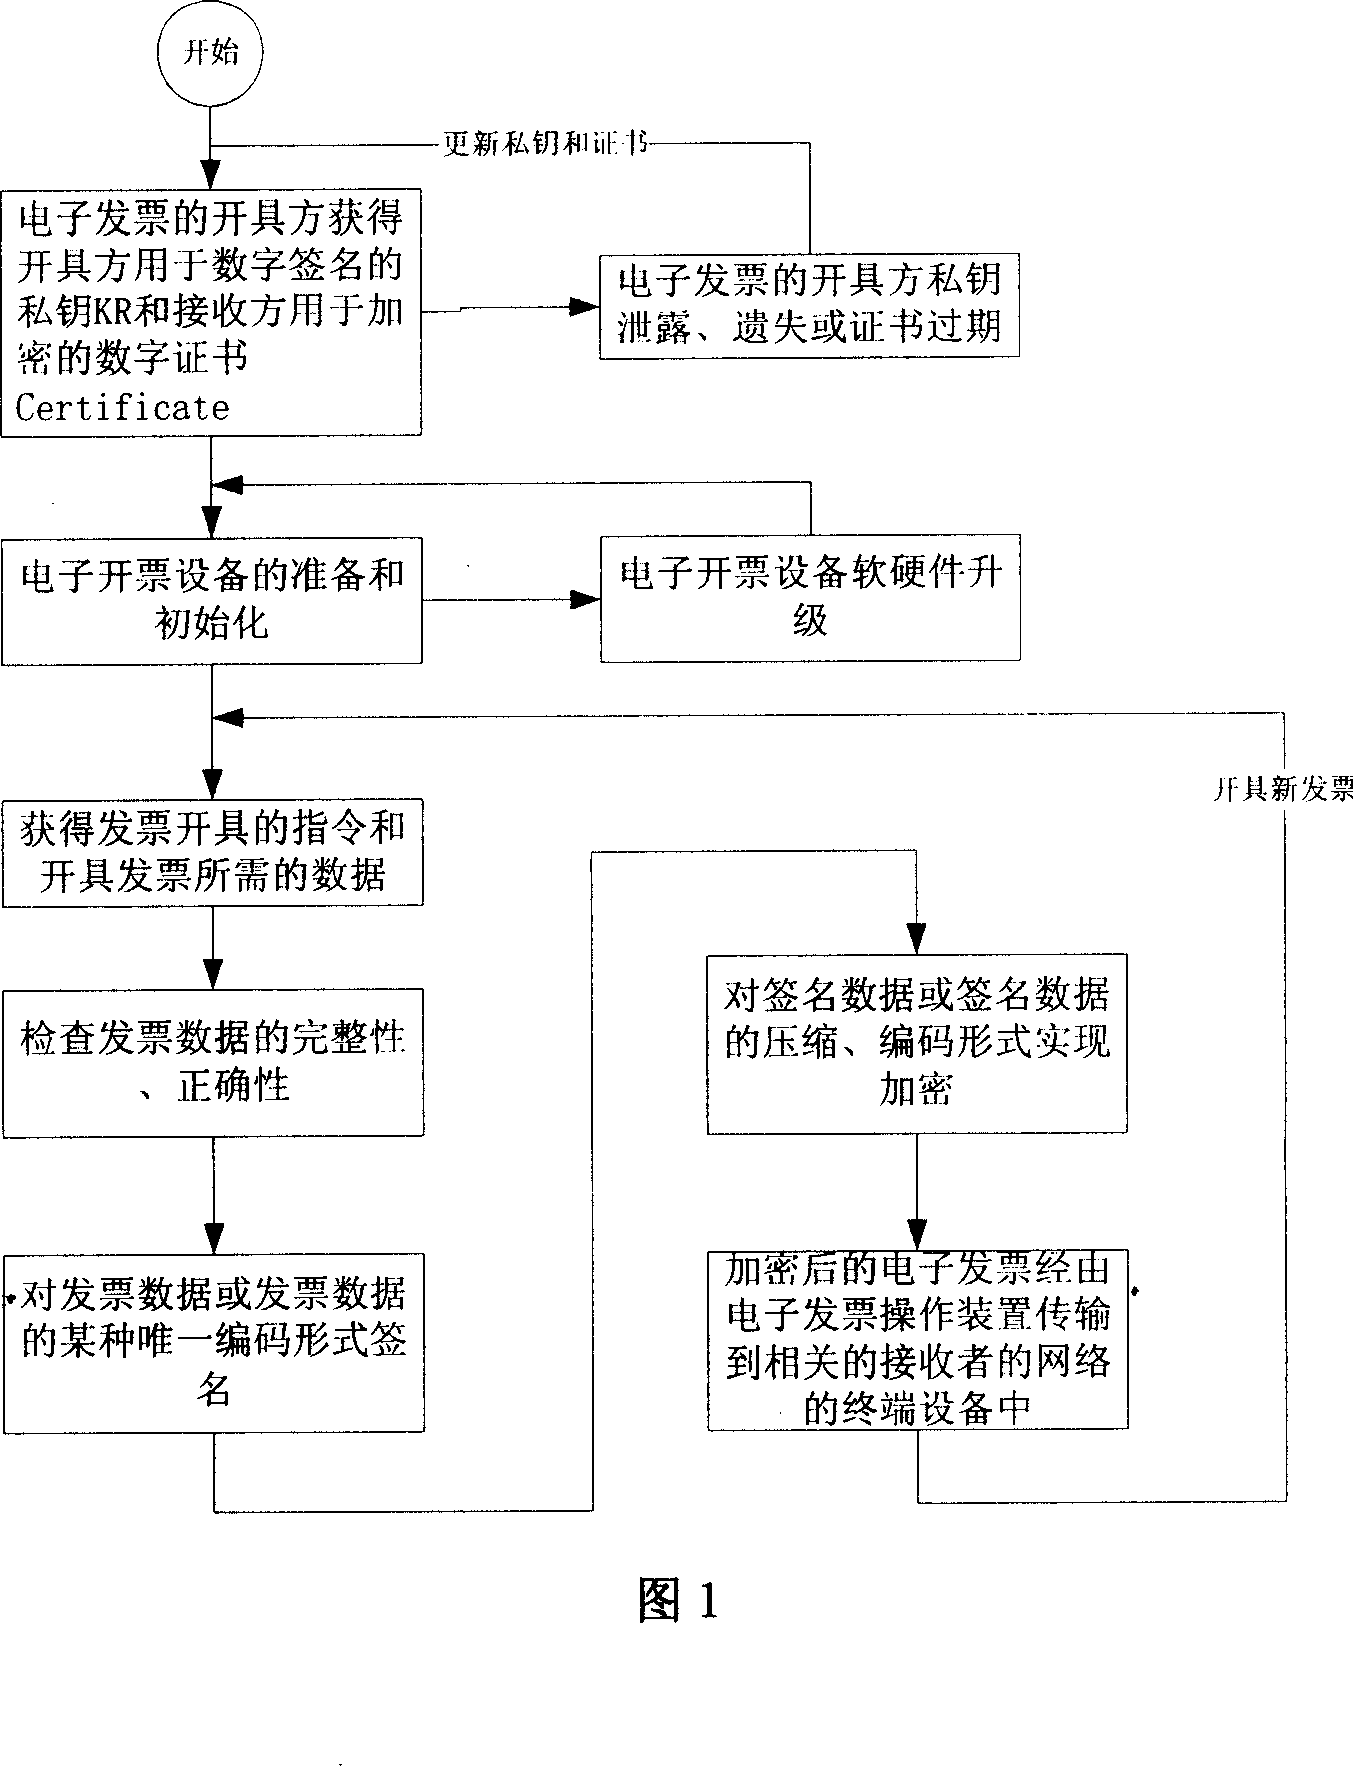 Method for generating electronic invoice and interactively using based on communication network